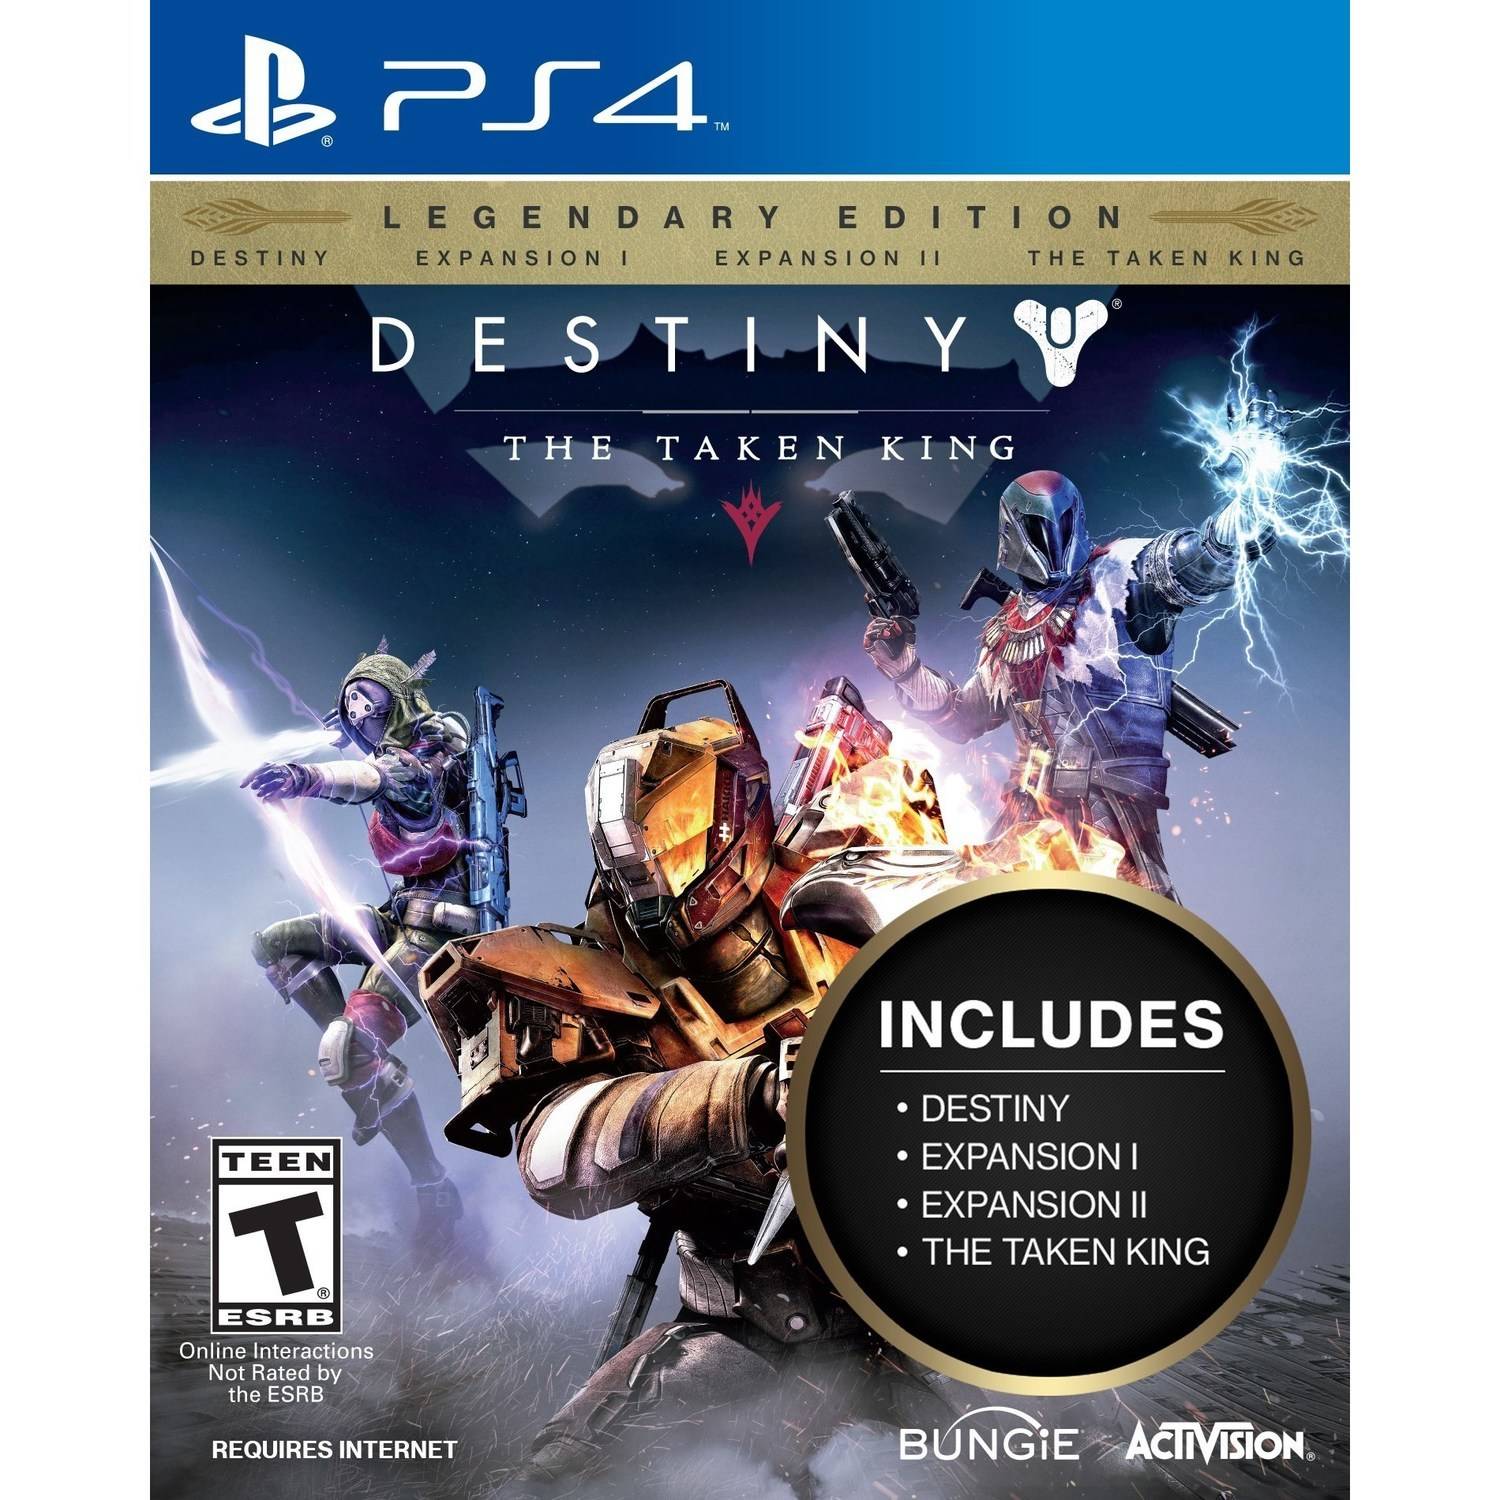 Destiny: The Taken King Legendary Edition, Activision, PlayStation 4, 047875874428 - image 1 of 31